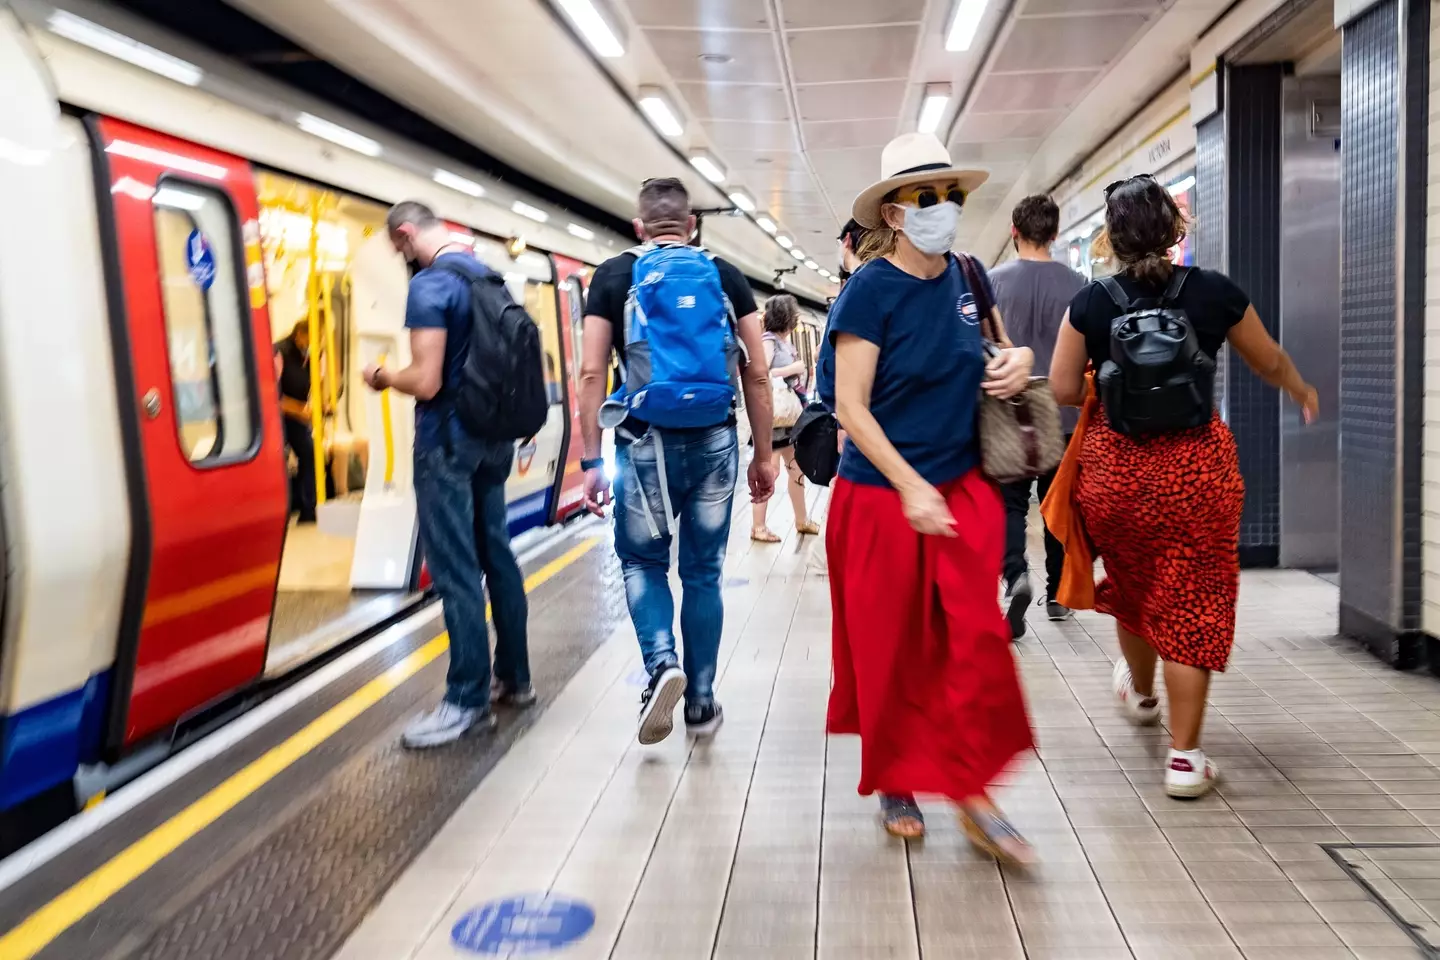 Commuters on a London Underground station platform wearing Covid 19 face masks.